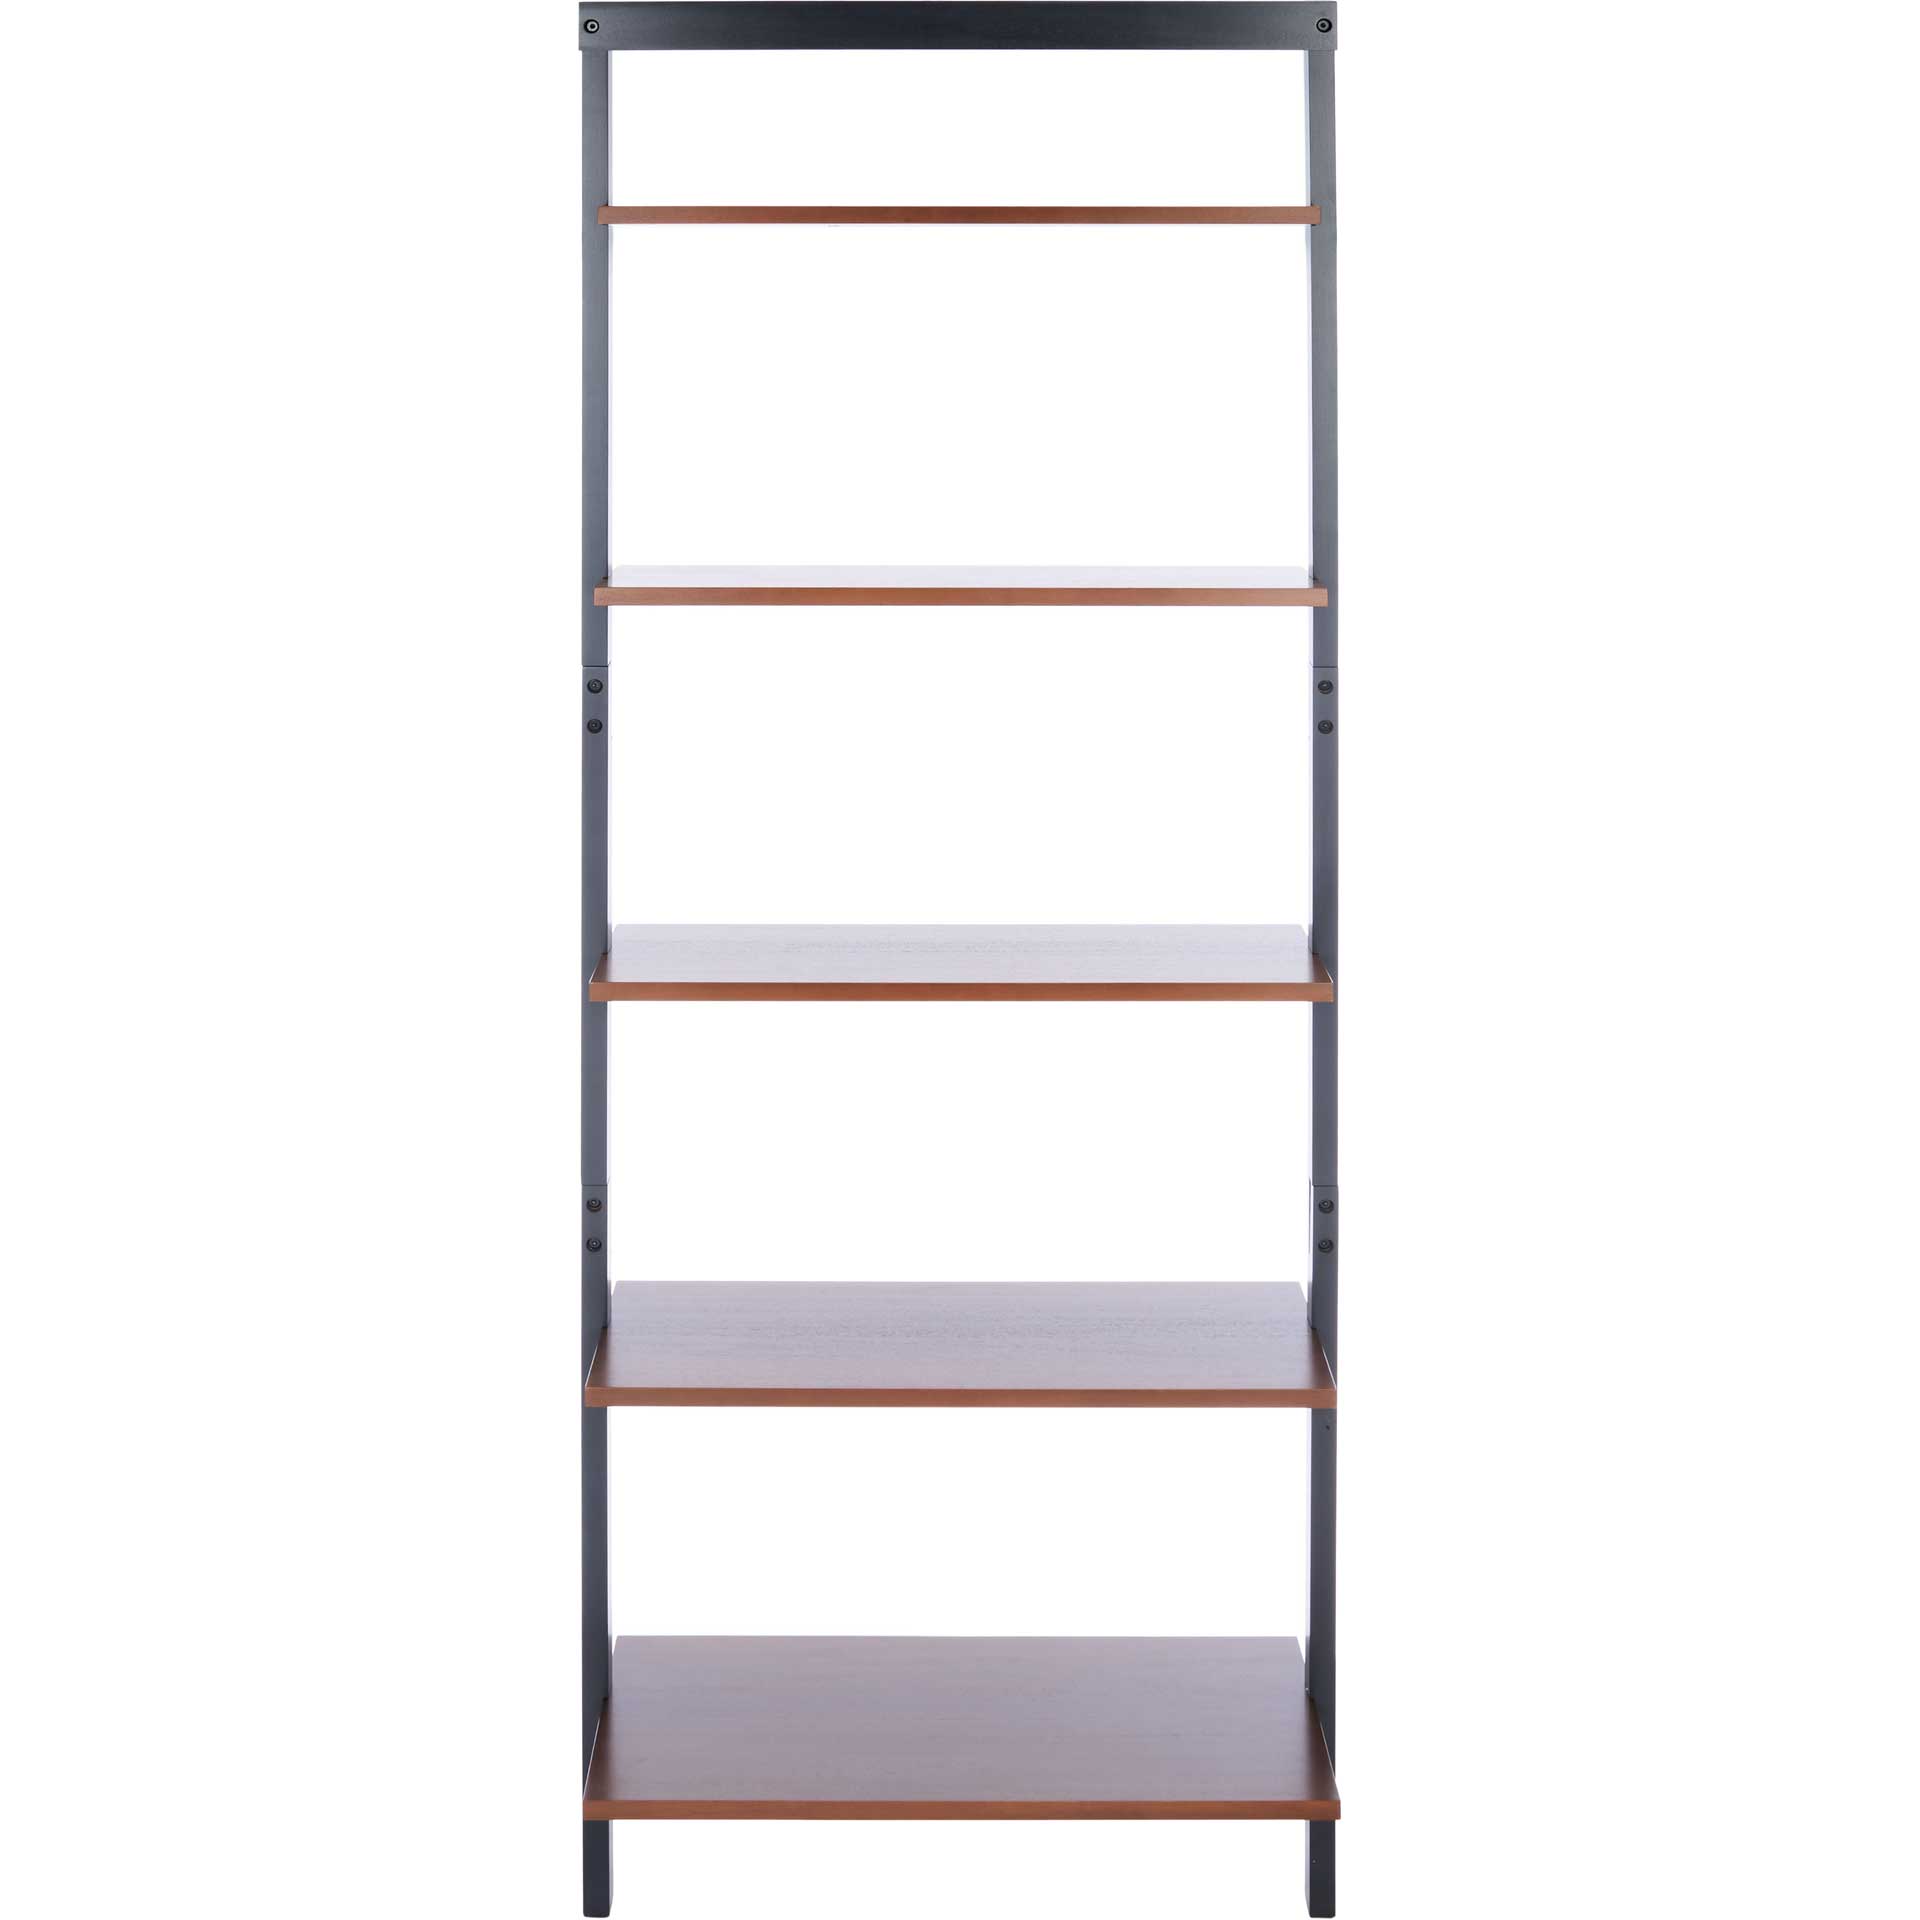 Cuallea 5 Tier Leaning Etagere Honey Brown/Charcoal